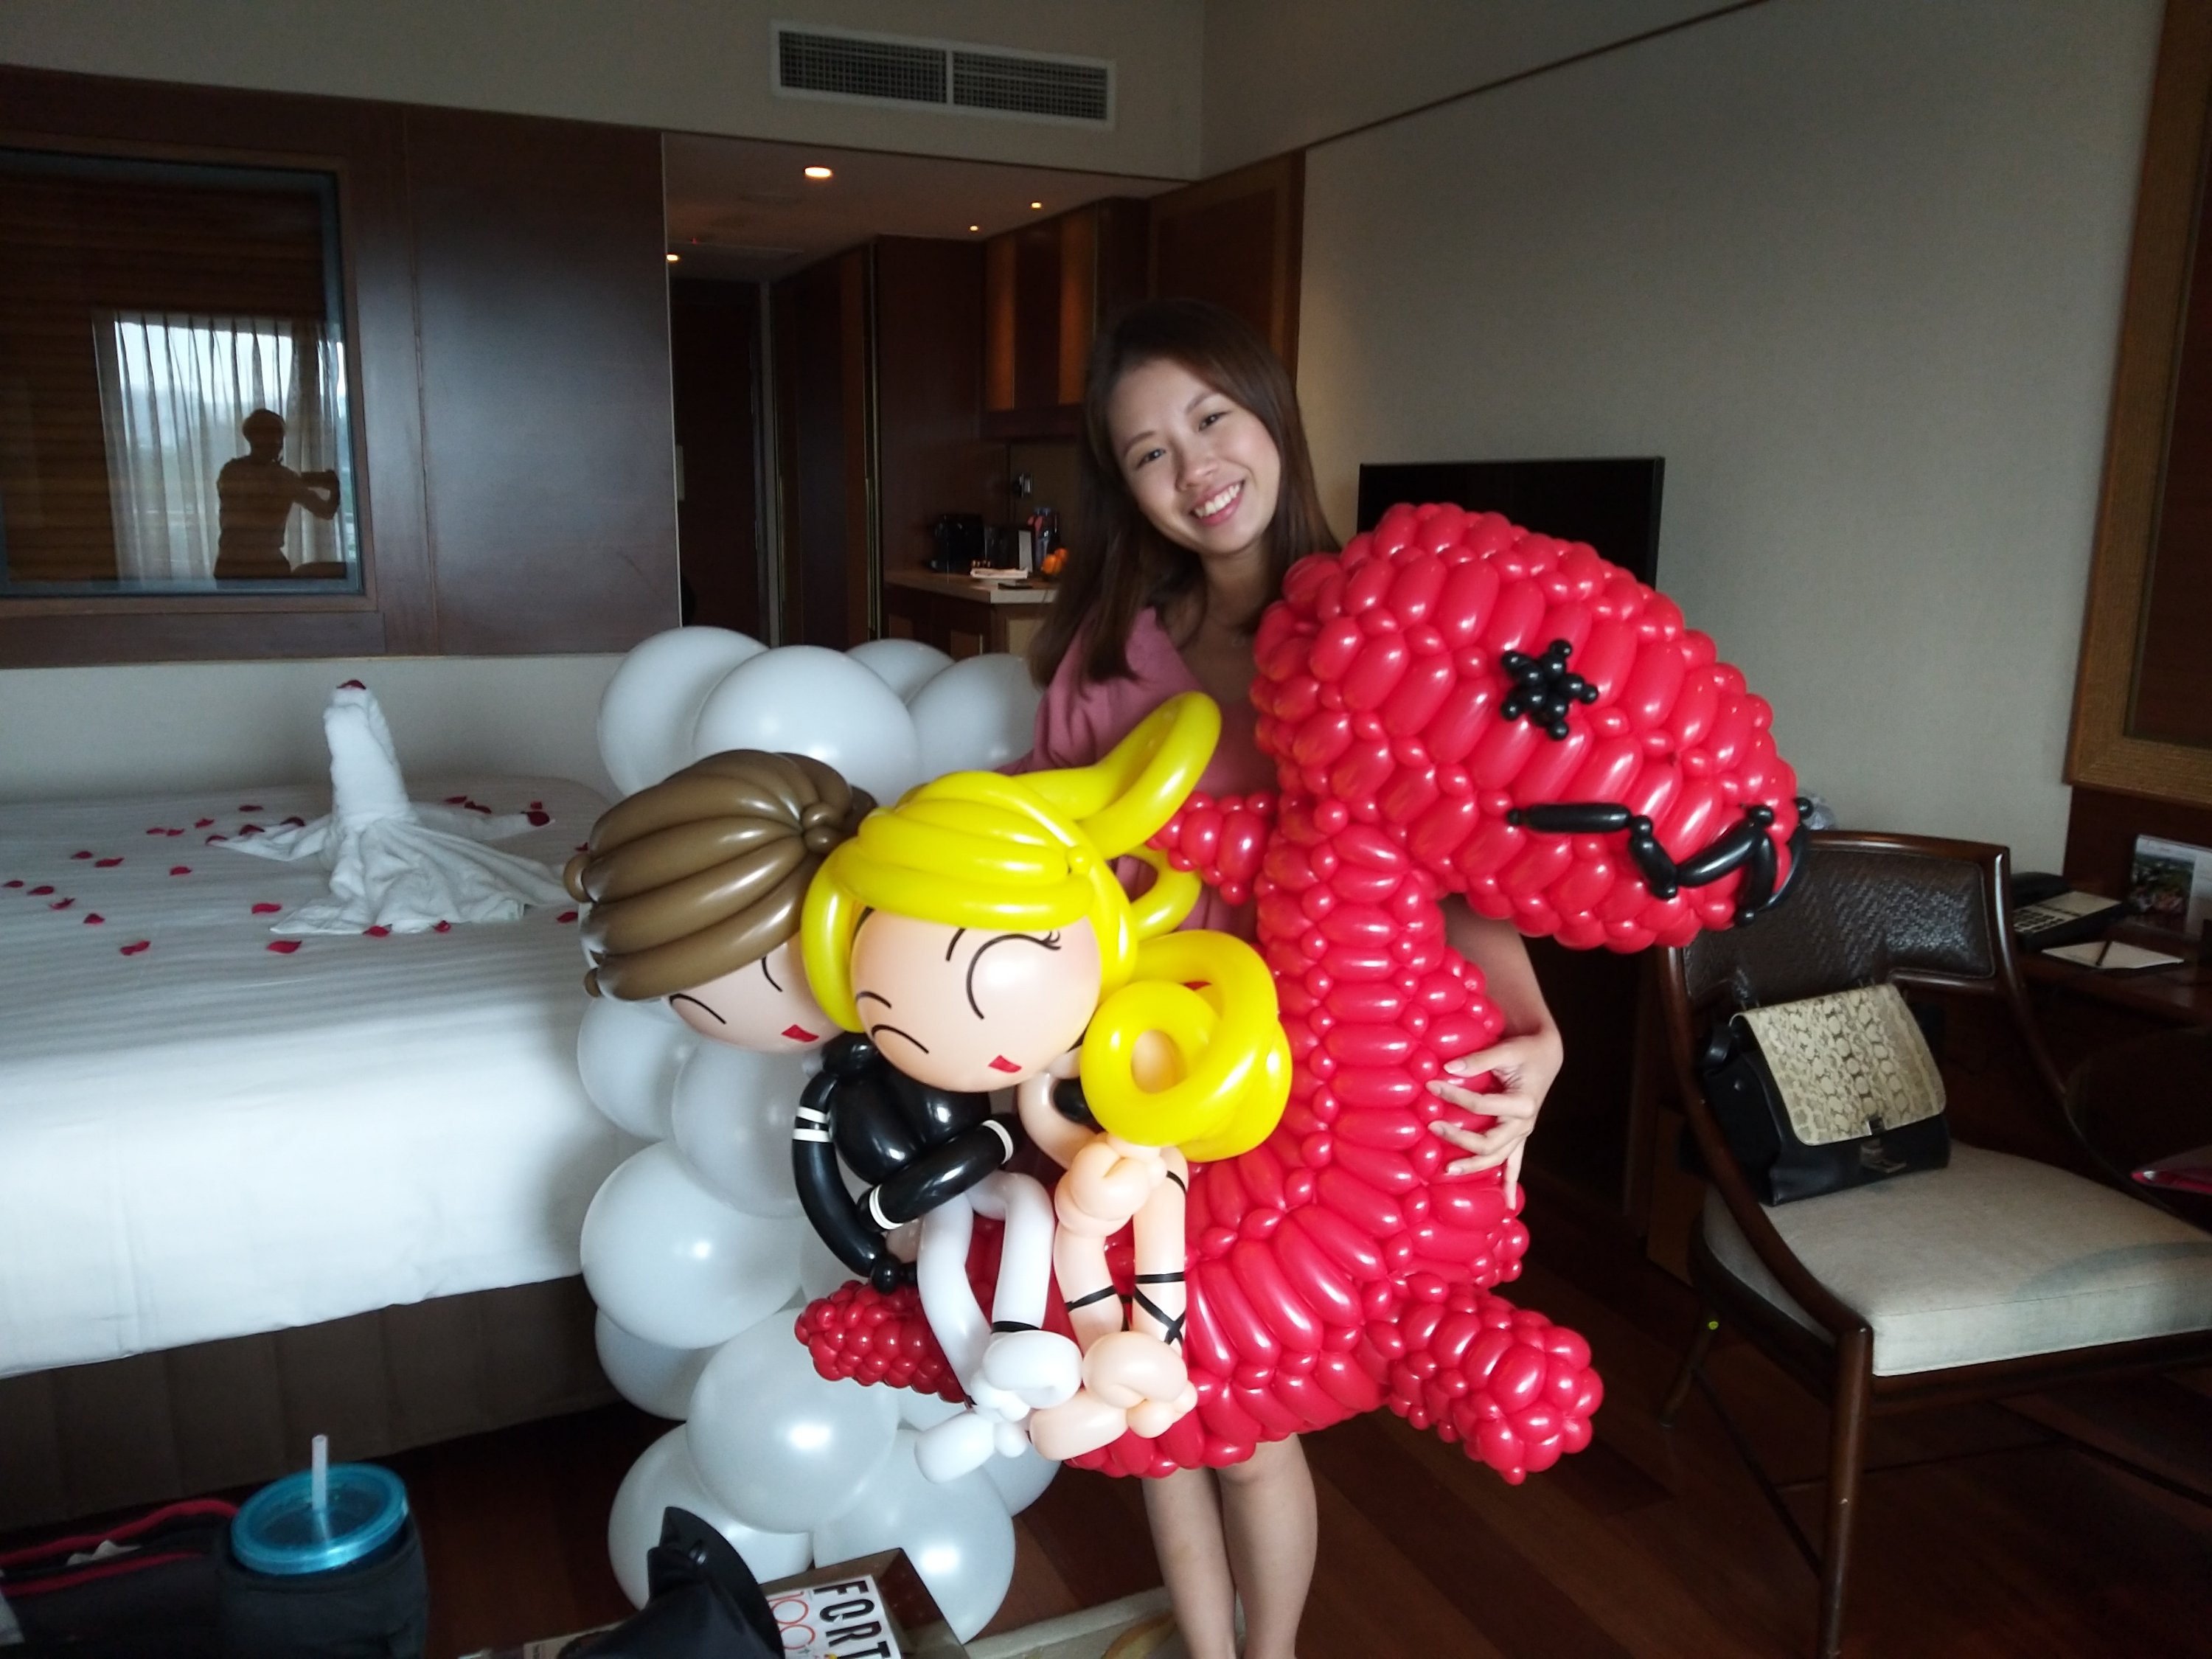 , One year anniversary balloon decorations, Singapore Balloon Decoration Services - Balloon Workshop and Balloon Sculpting